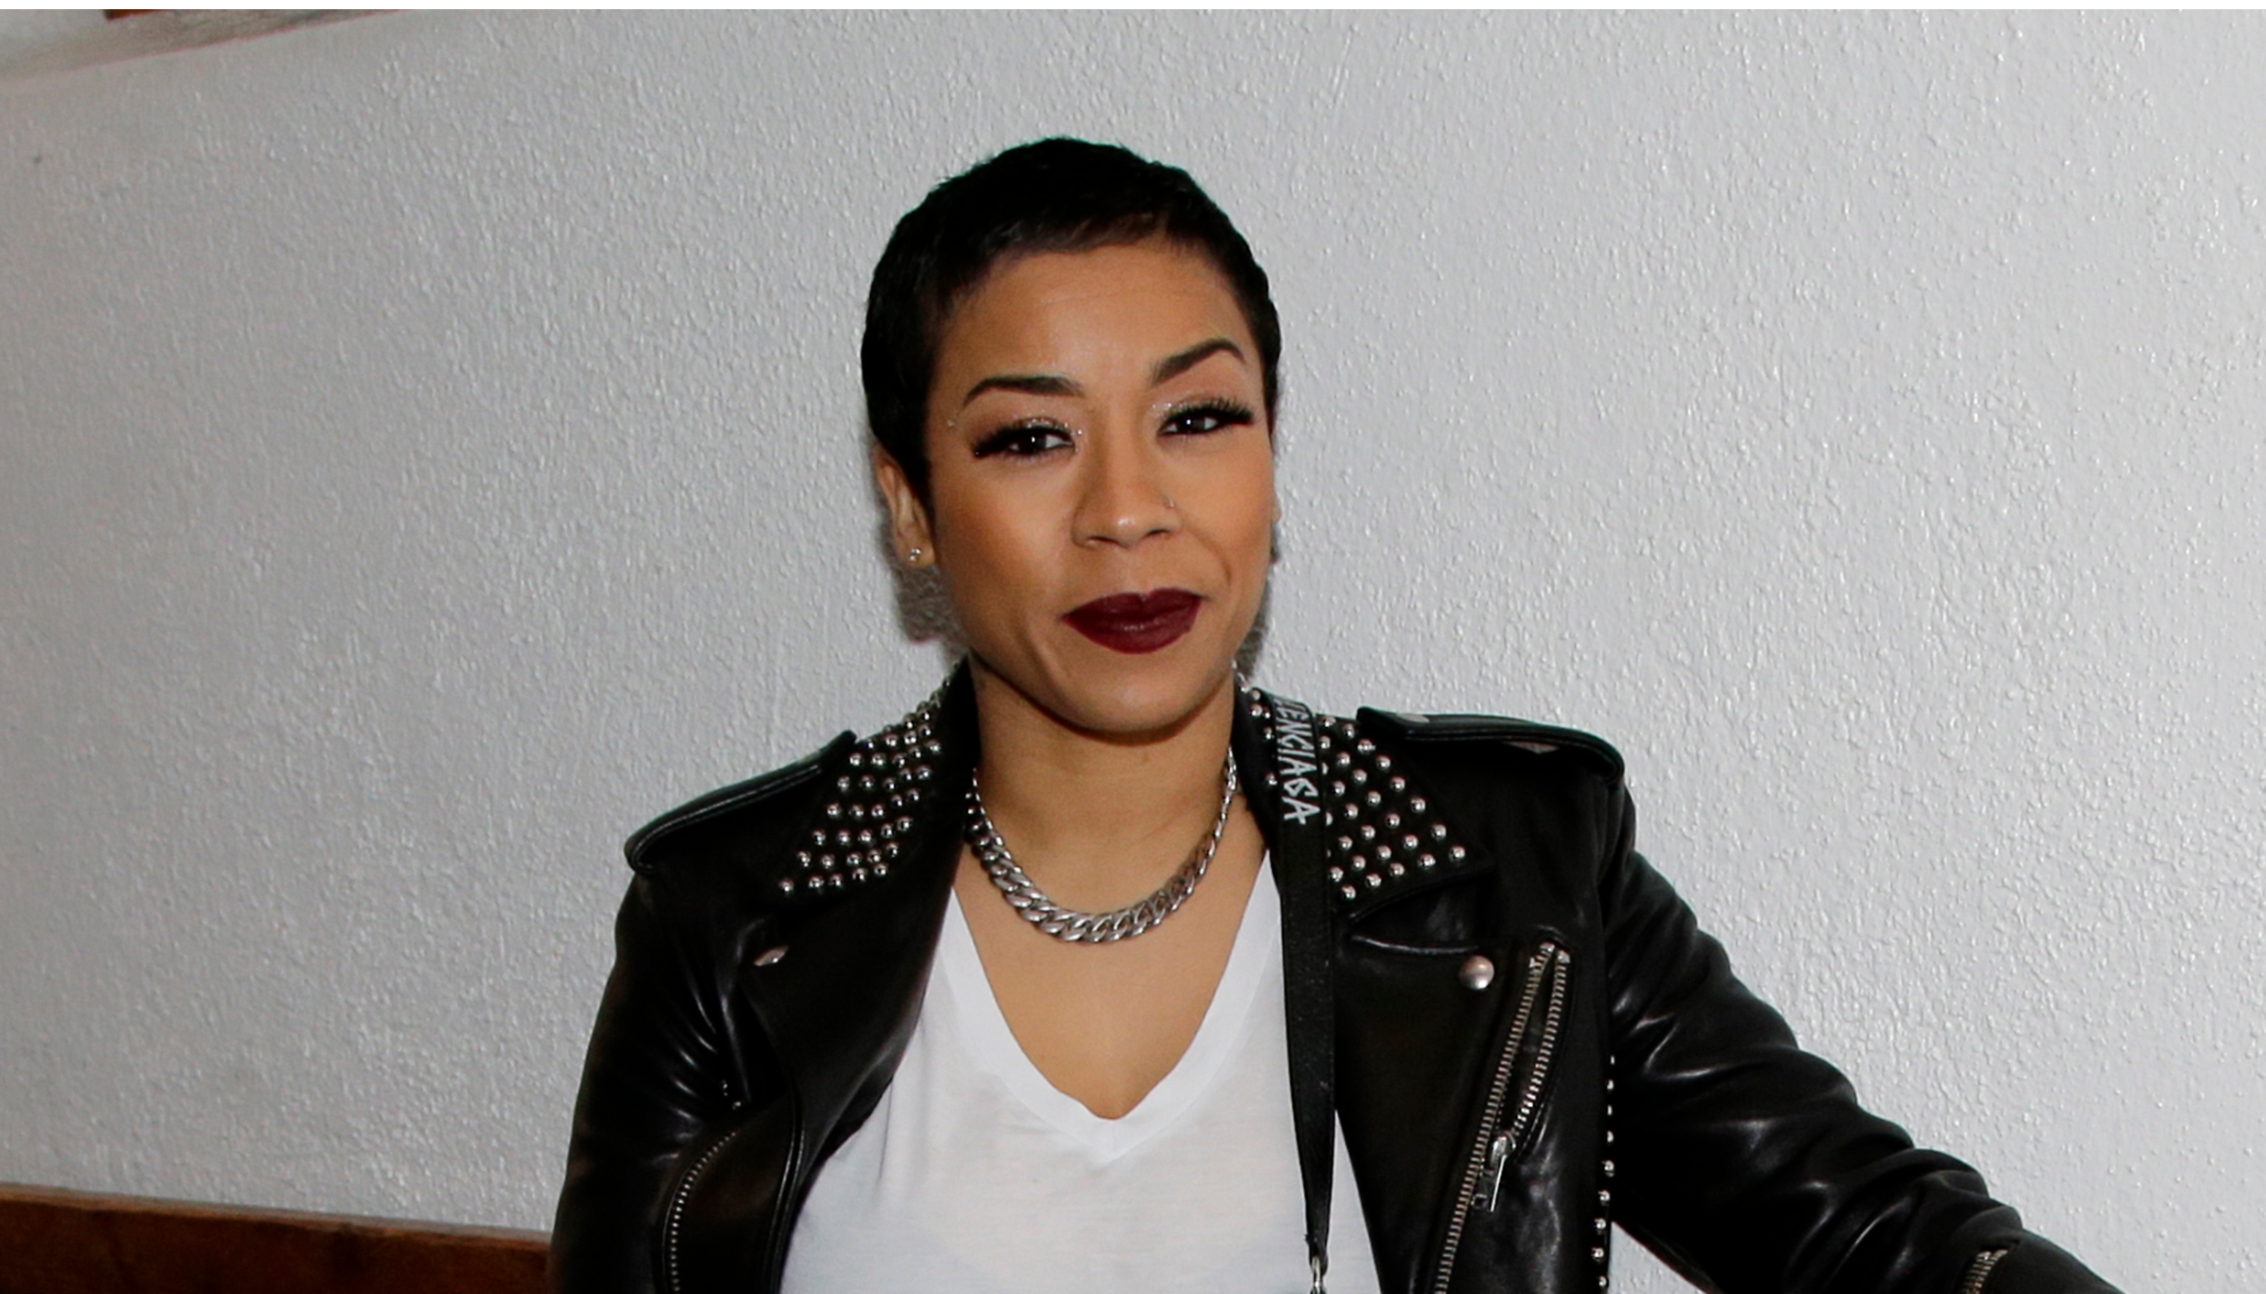 Keyshia Cole Has Found Love Again And She Has The Hickey To Prove It